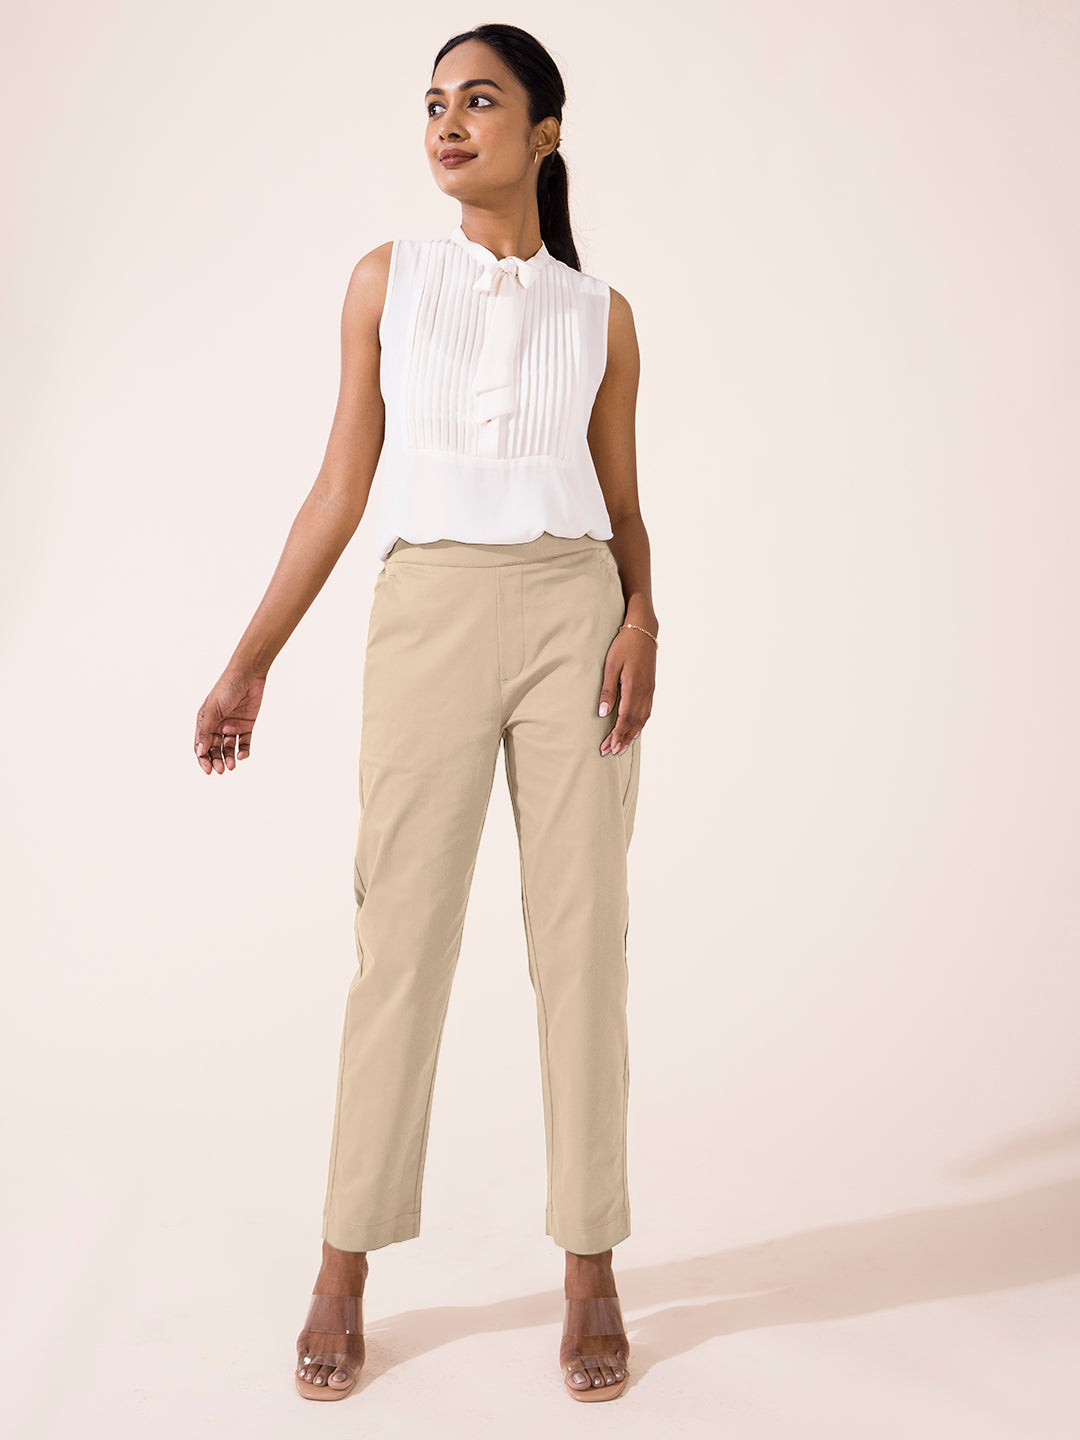 The latest collection of beige trousers & lowers for women | FASHIOLA INDIA